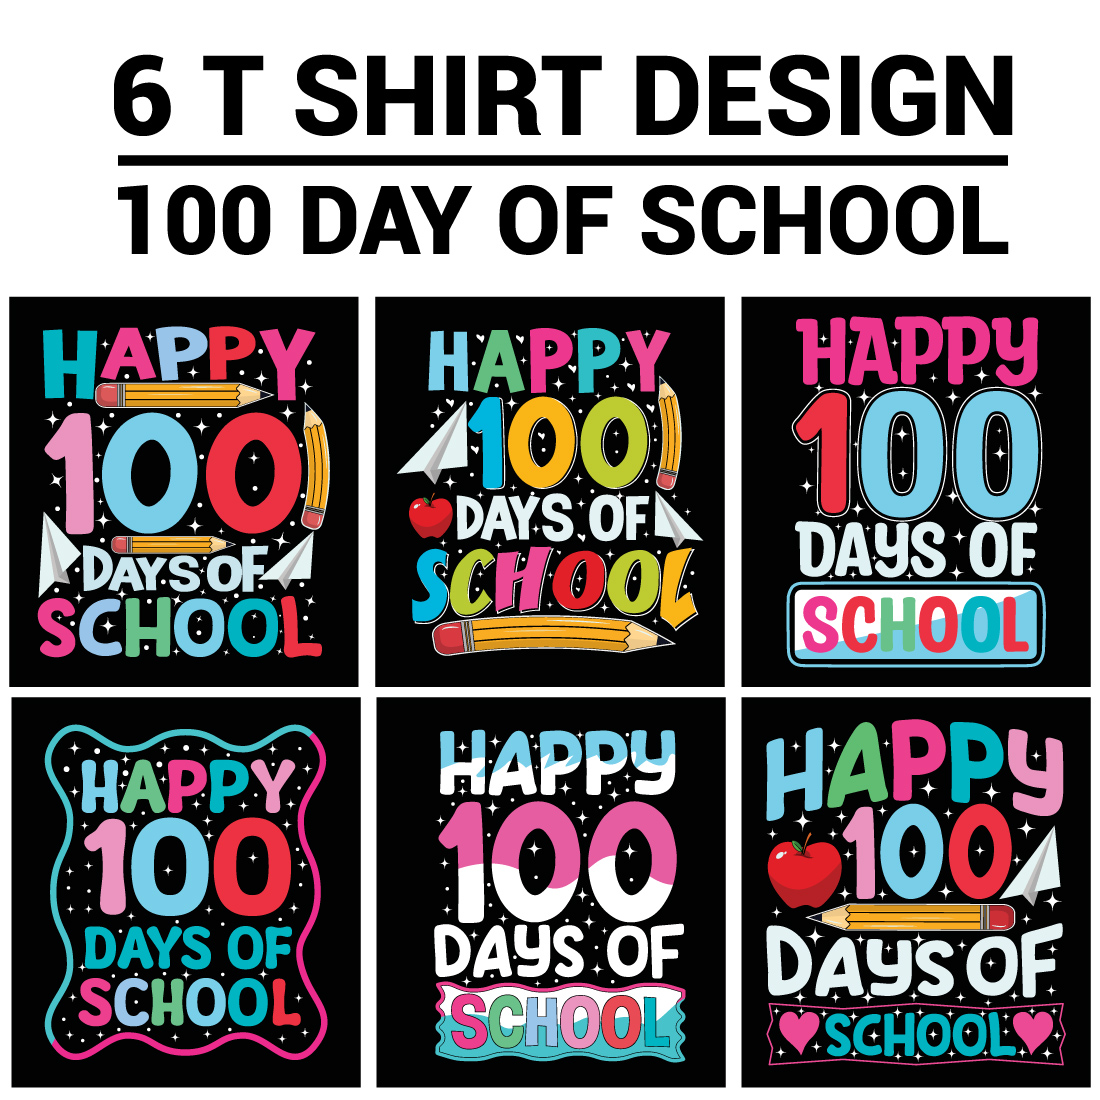 100 DAY OF SCHOOL T SHIRT DESIGN cover image.